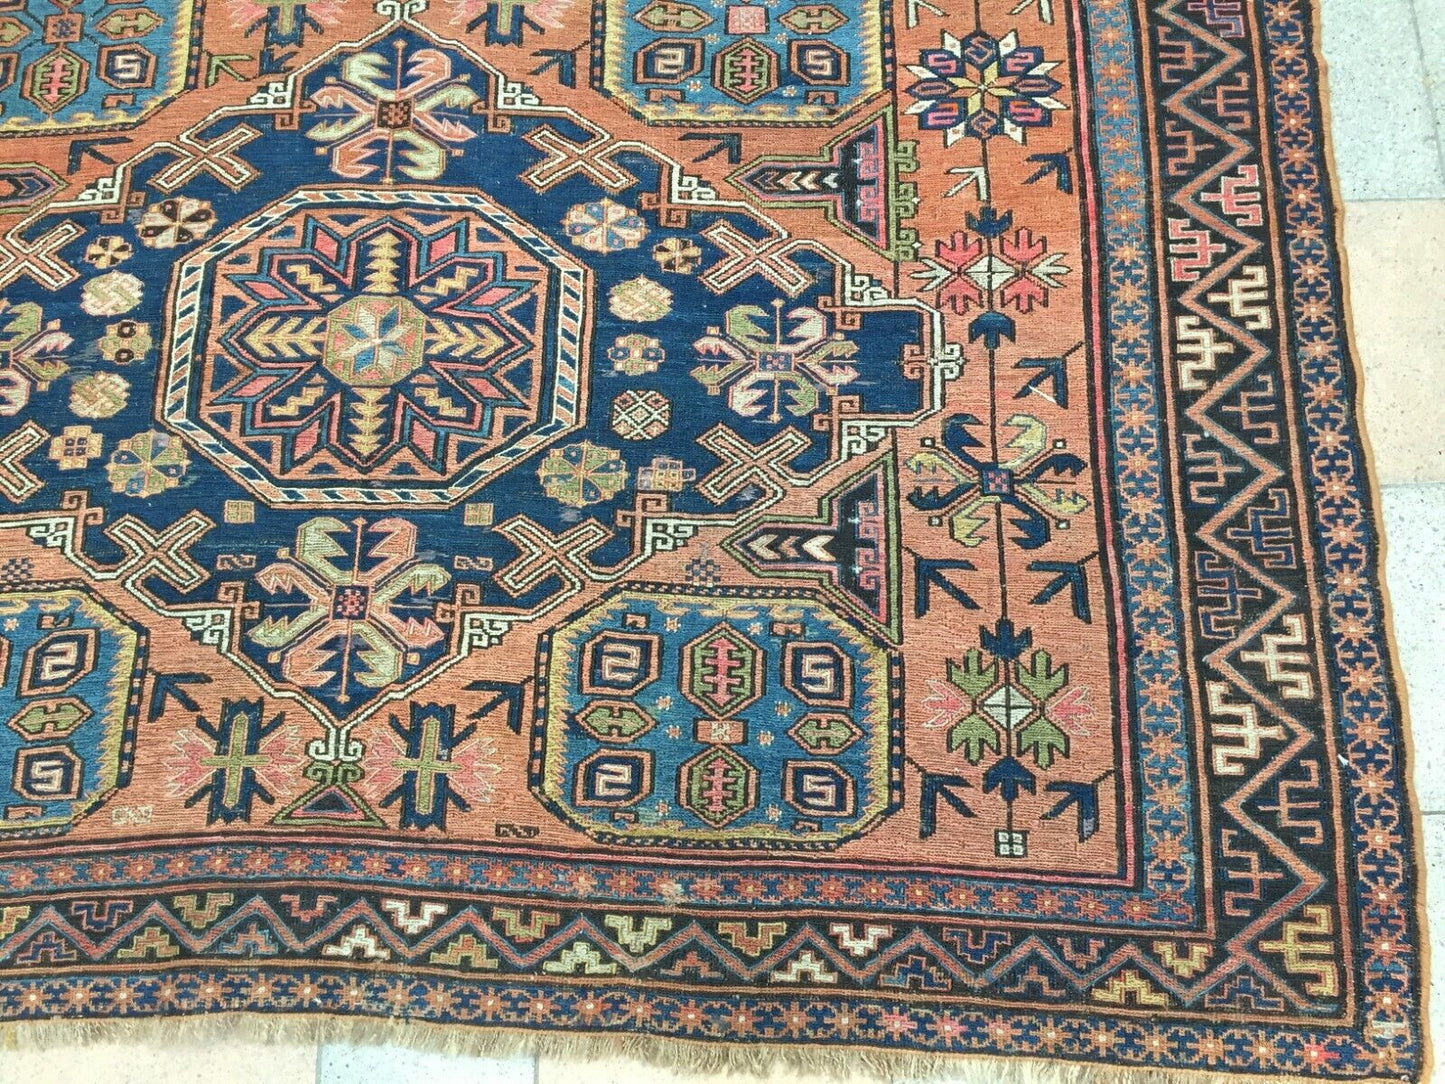 Side angle view of the rug, capturing its size and vibrant colors